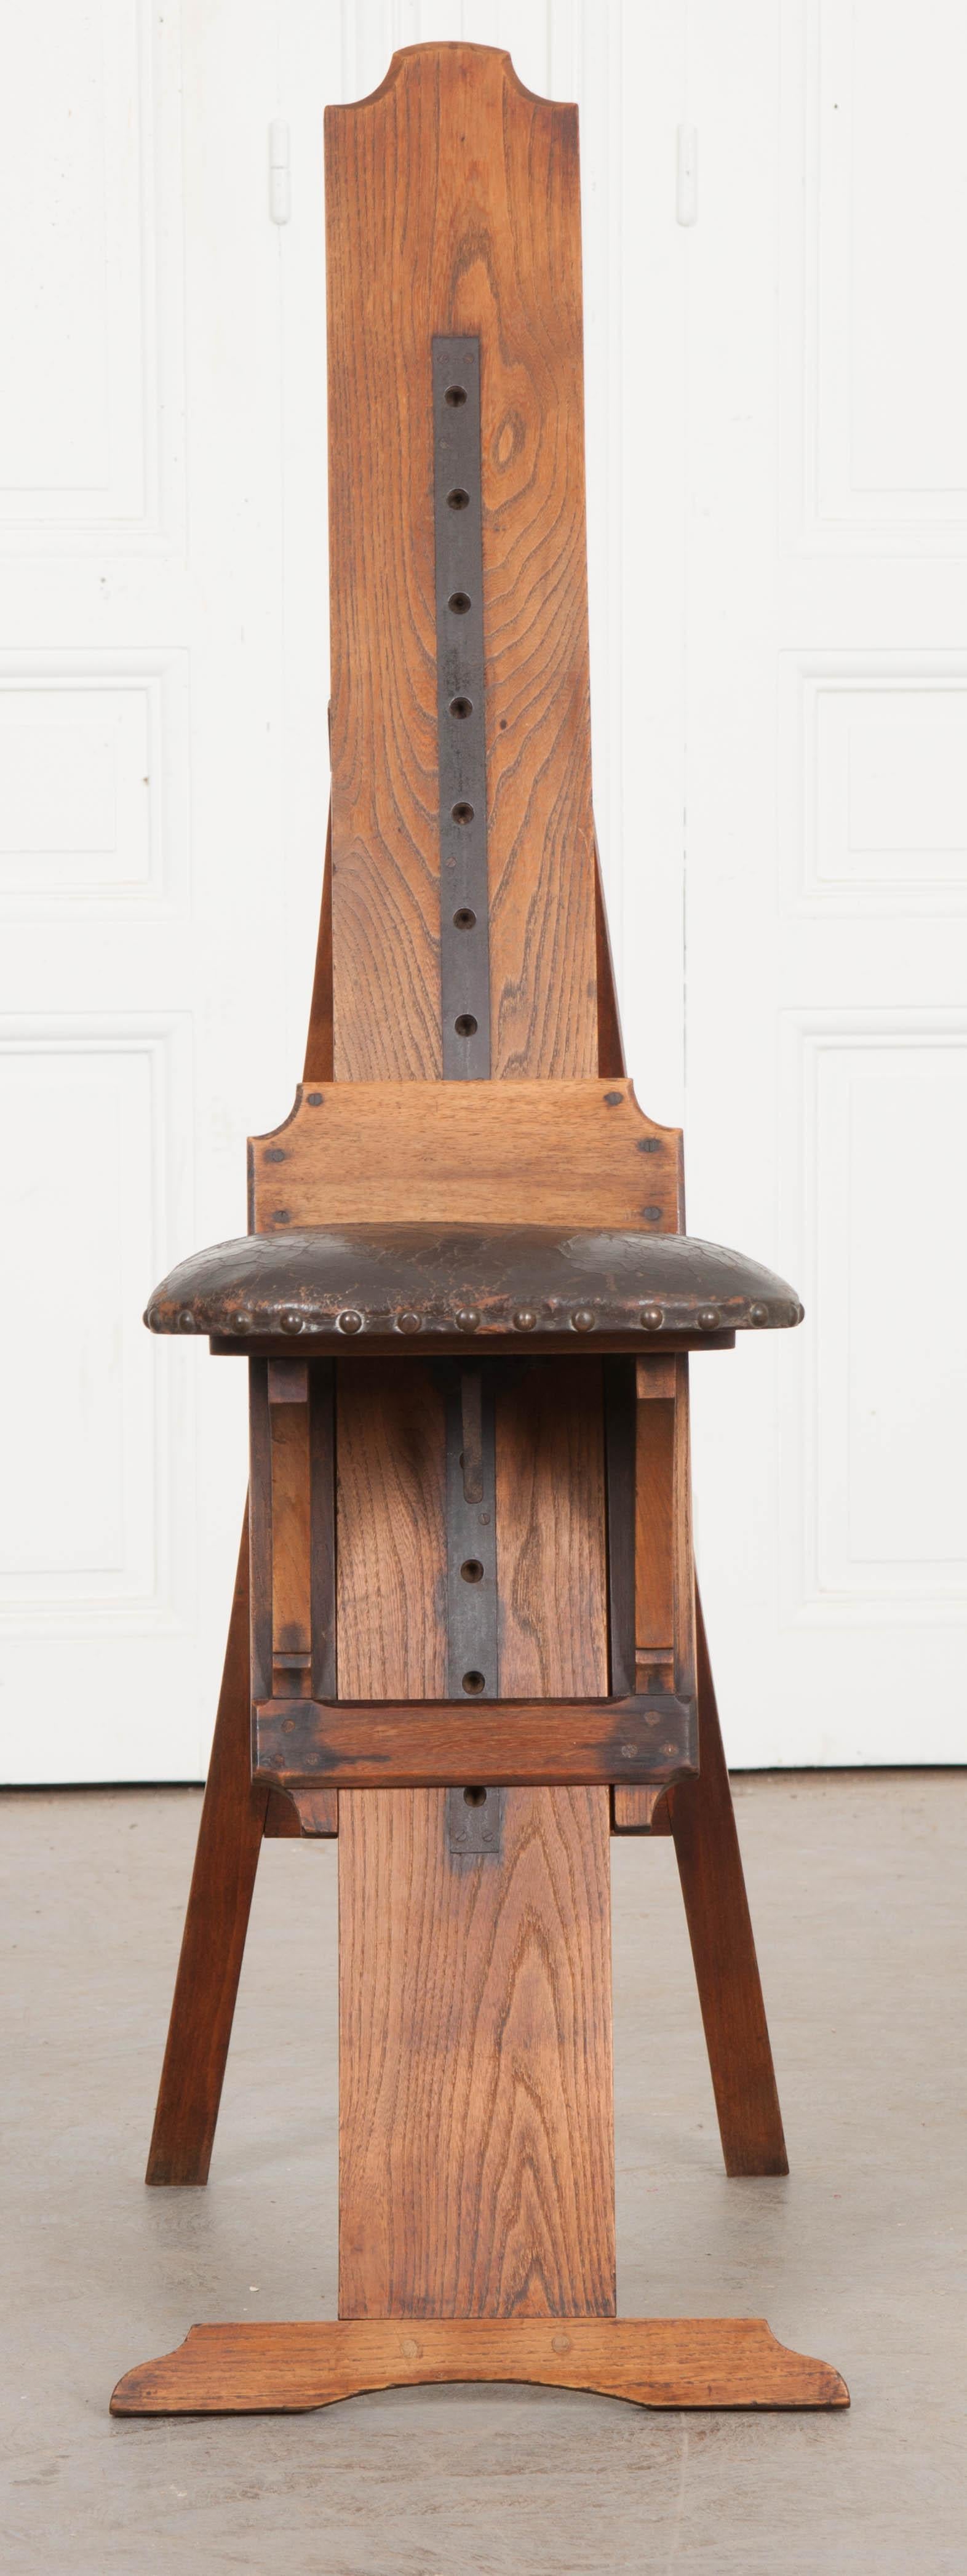 This rare and sturdy oak chair, from England, circa 1870s, would have been used by an artist for seating a model or portrait sitter as the original leather-upholstered seat is adjustable for use at various heights.
Measures: Seat height adjustable